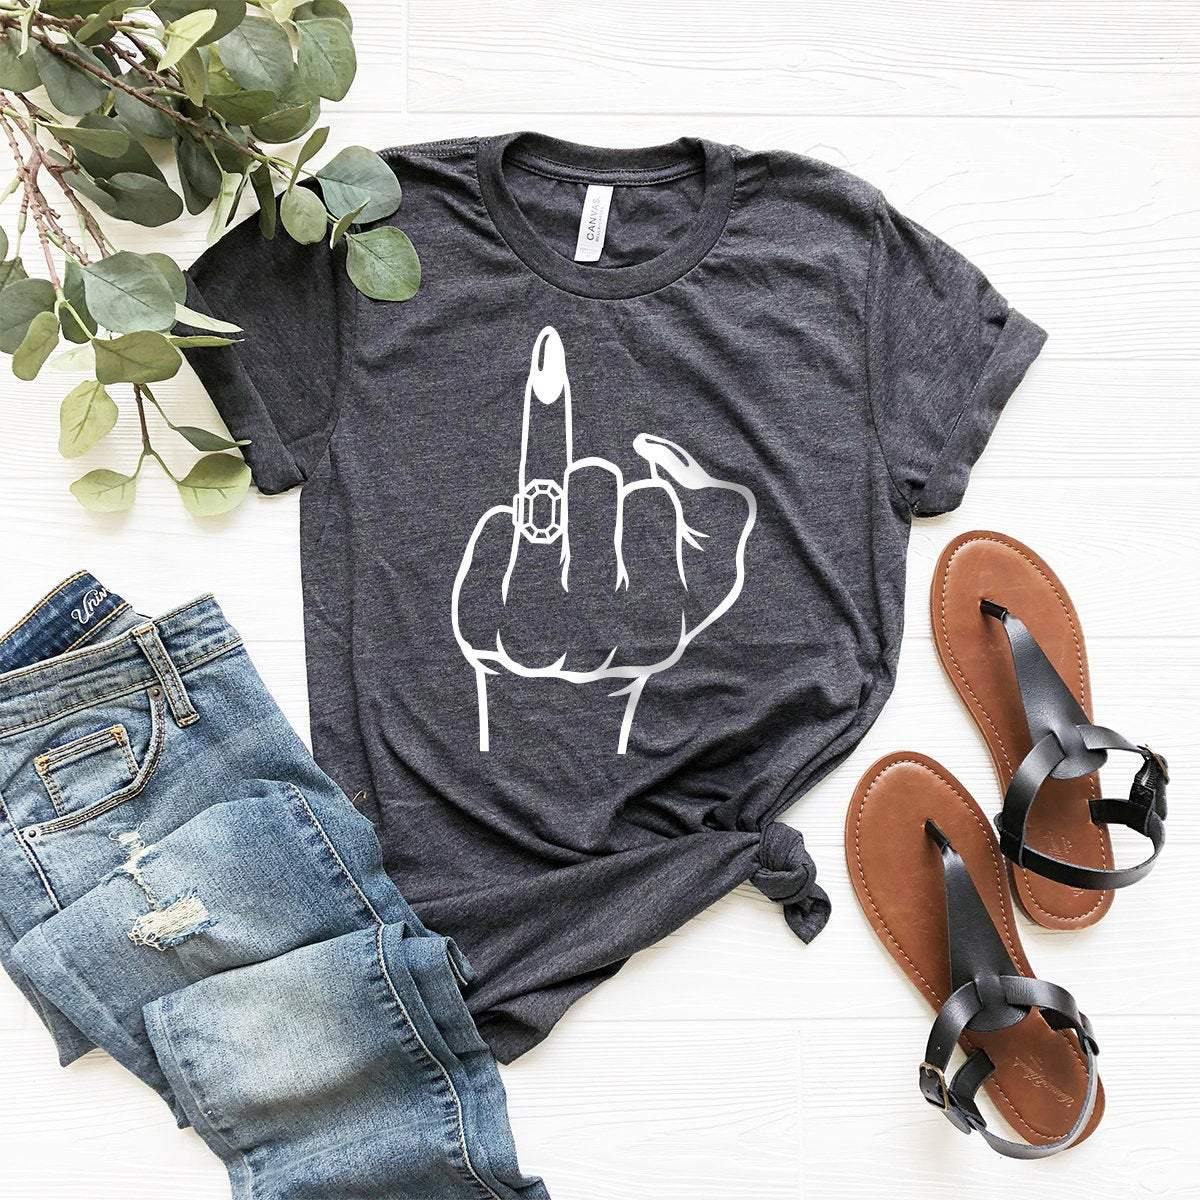 Bridal Party Shirt, Ring Finger With Ring Shirt, Funny Bridal Shirt, Engaged AF T-Shirt, Engagement Announcement, Bride Finger Shirt - Fastdeliverytees.com